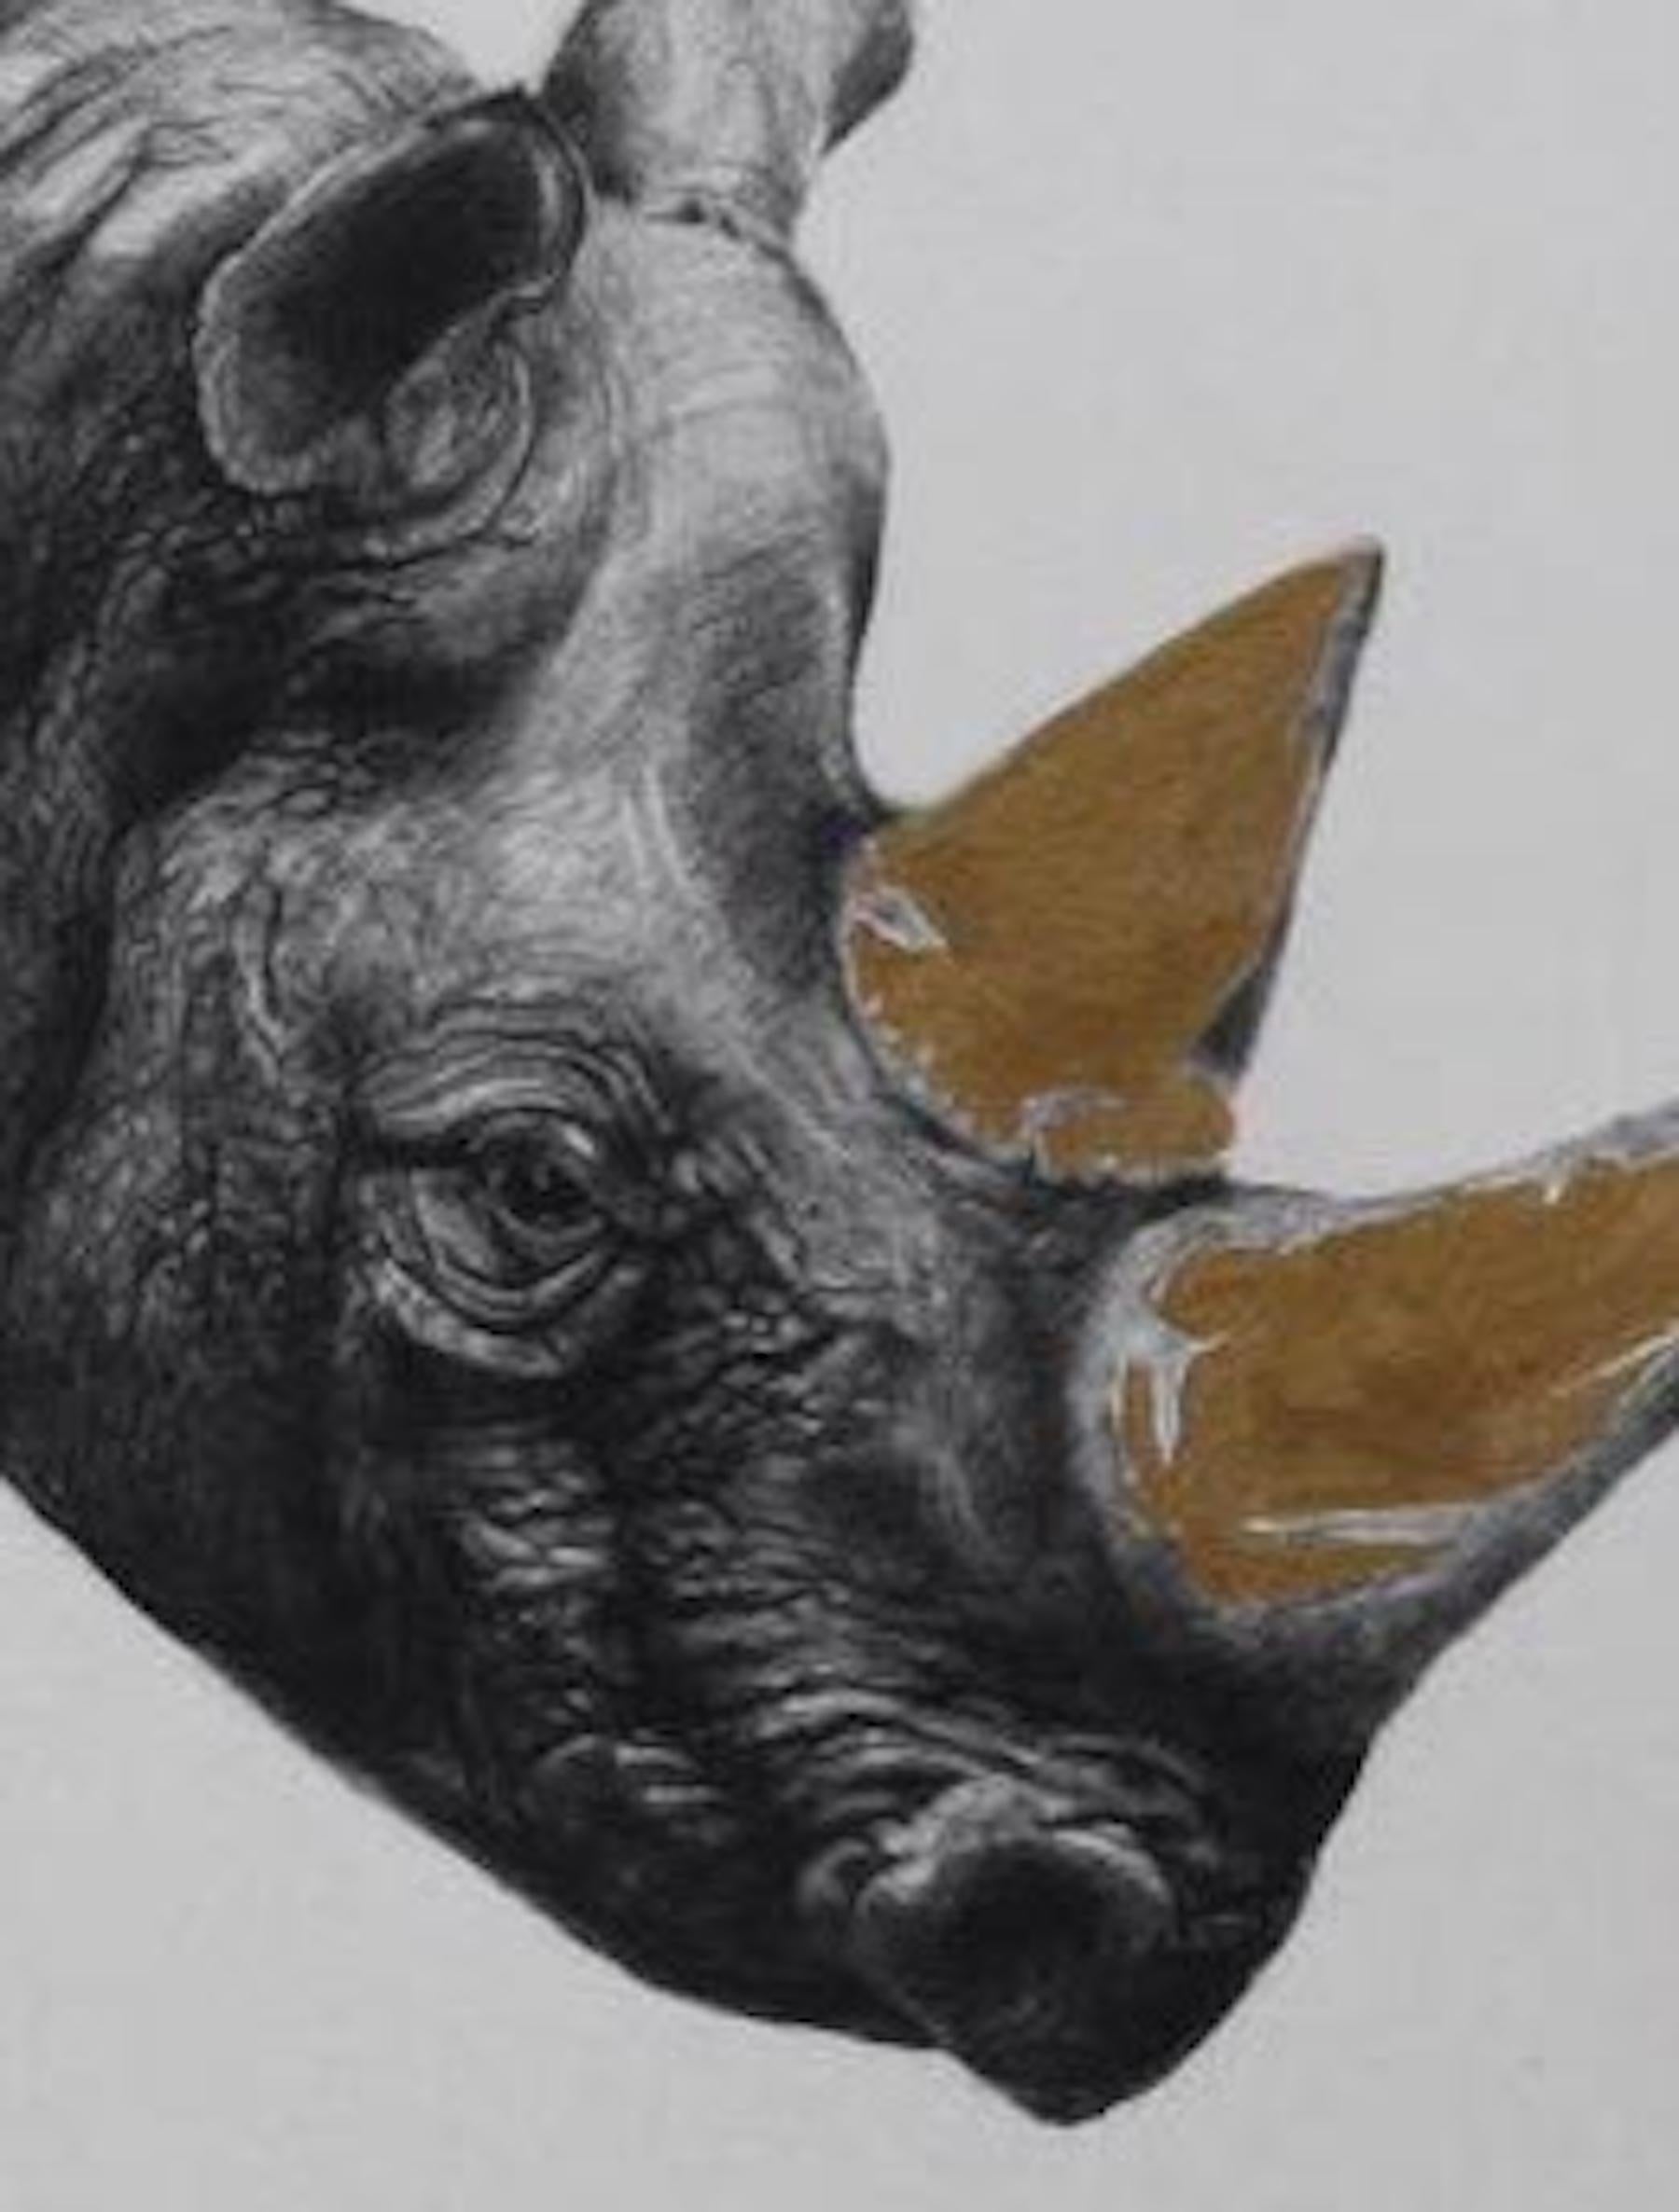 RHINOCEROS (state II) by Tammy Maclay.
Edition of 20.
Photopolymer print with hand painted gold detail.
22.2 H x 29.5 W (inches)
56.4 H x 75 W (CM)

Dürer’s iconic Rhinoceros print was the inspiration for this piece of work.

Tammy Mackay works are